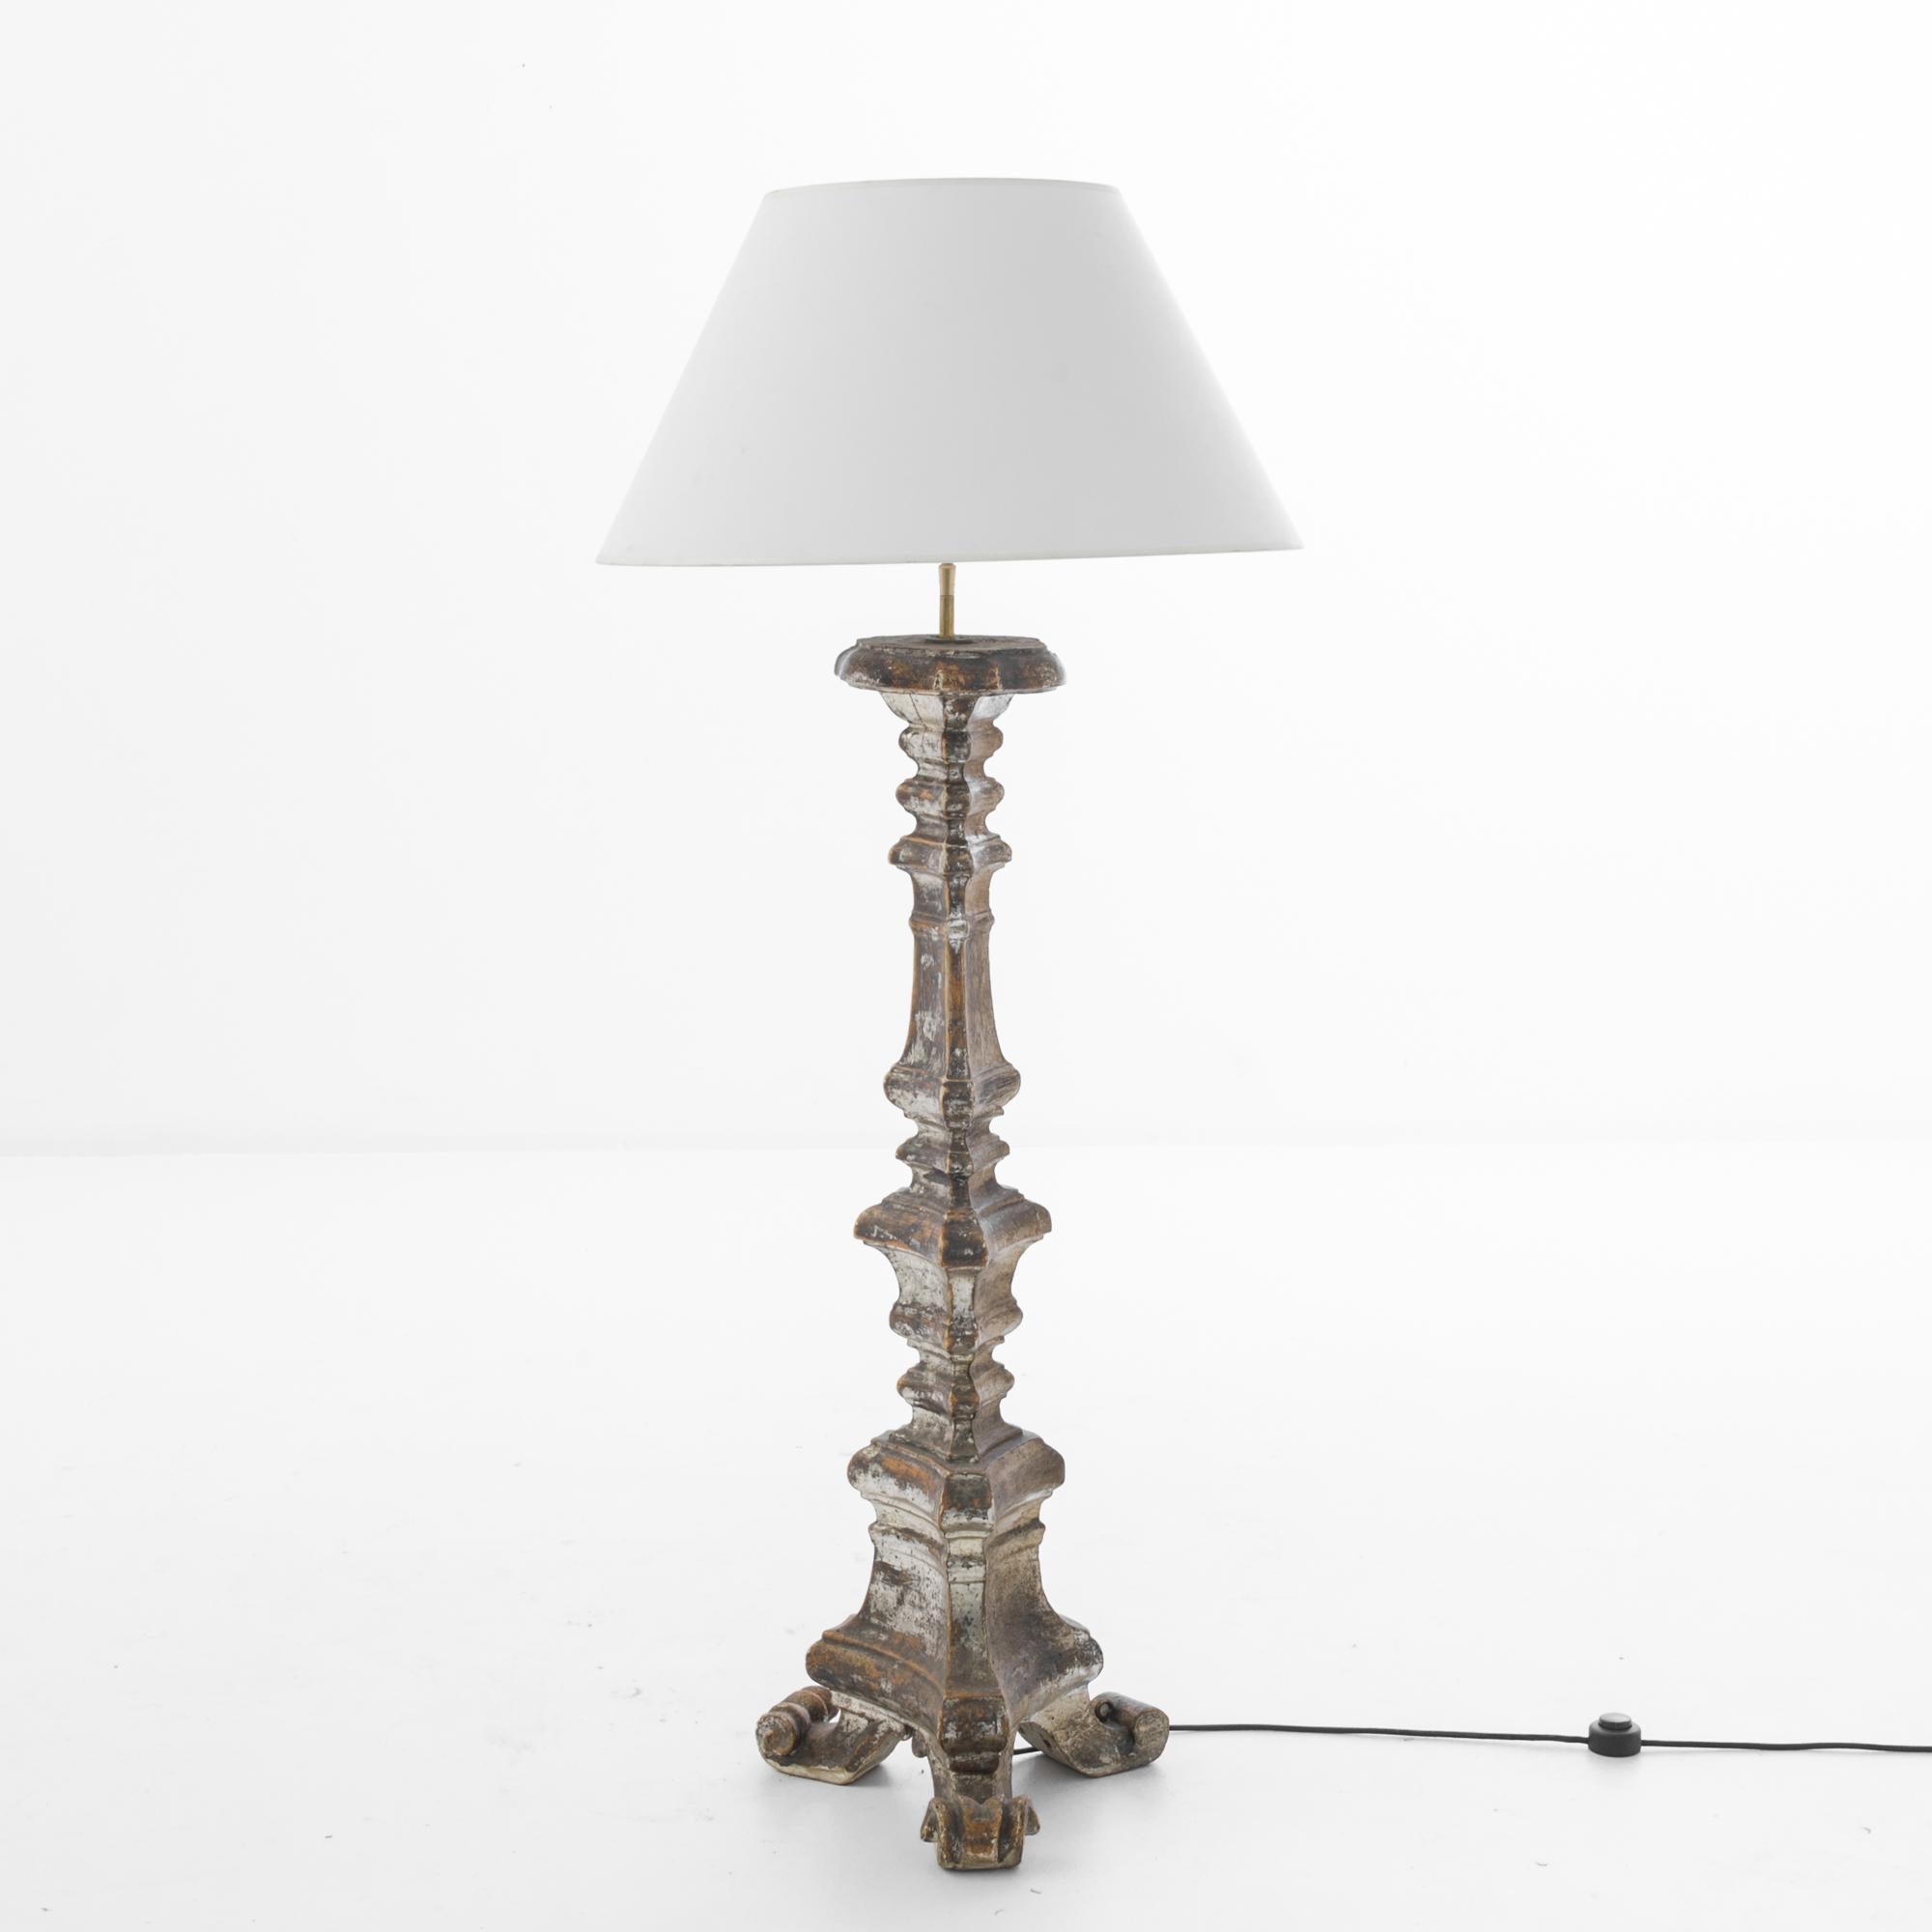 Made in France, circa 1800, this wooden floor lamp, with subtle carved ornament adorned with polychrome color, illuminates with a charming old-world ambiance. Formal carved profiles impart a neoclassical touch. The white empire lampshade, supported